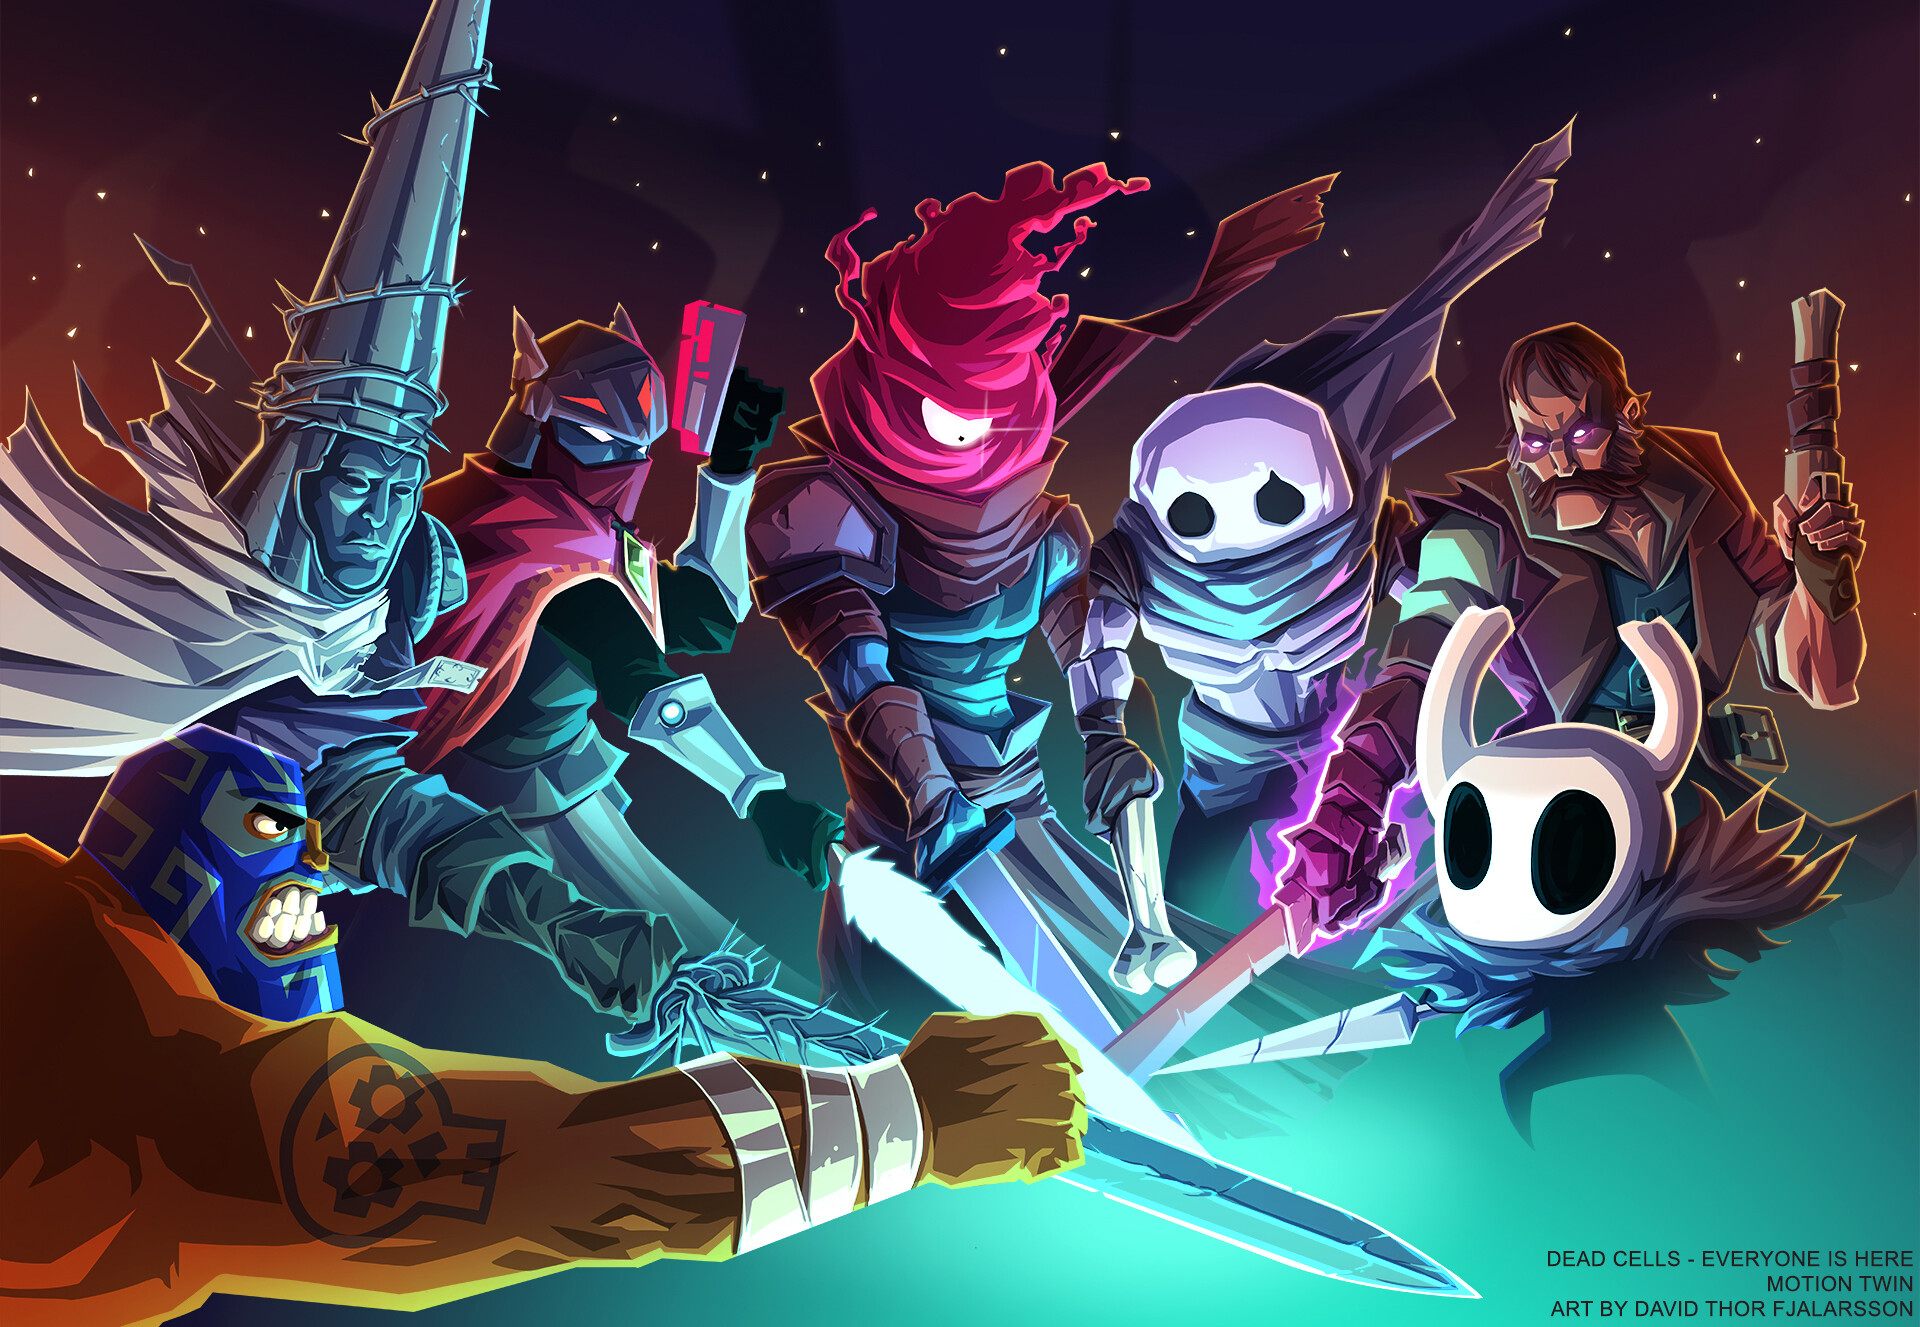 HD wallpaper featuring characters from Dead Cells video game with dynamic action poses on a vibrant background.